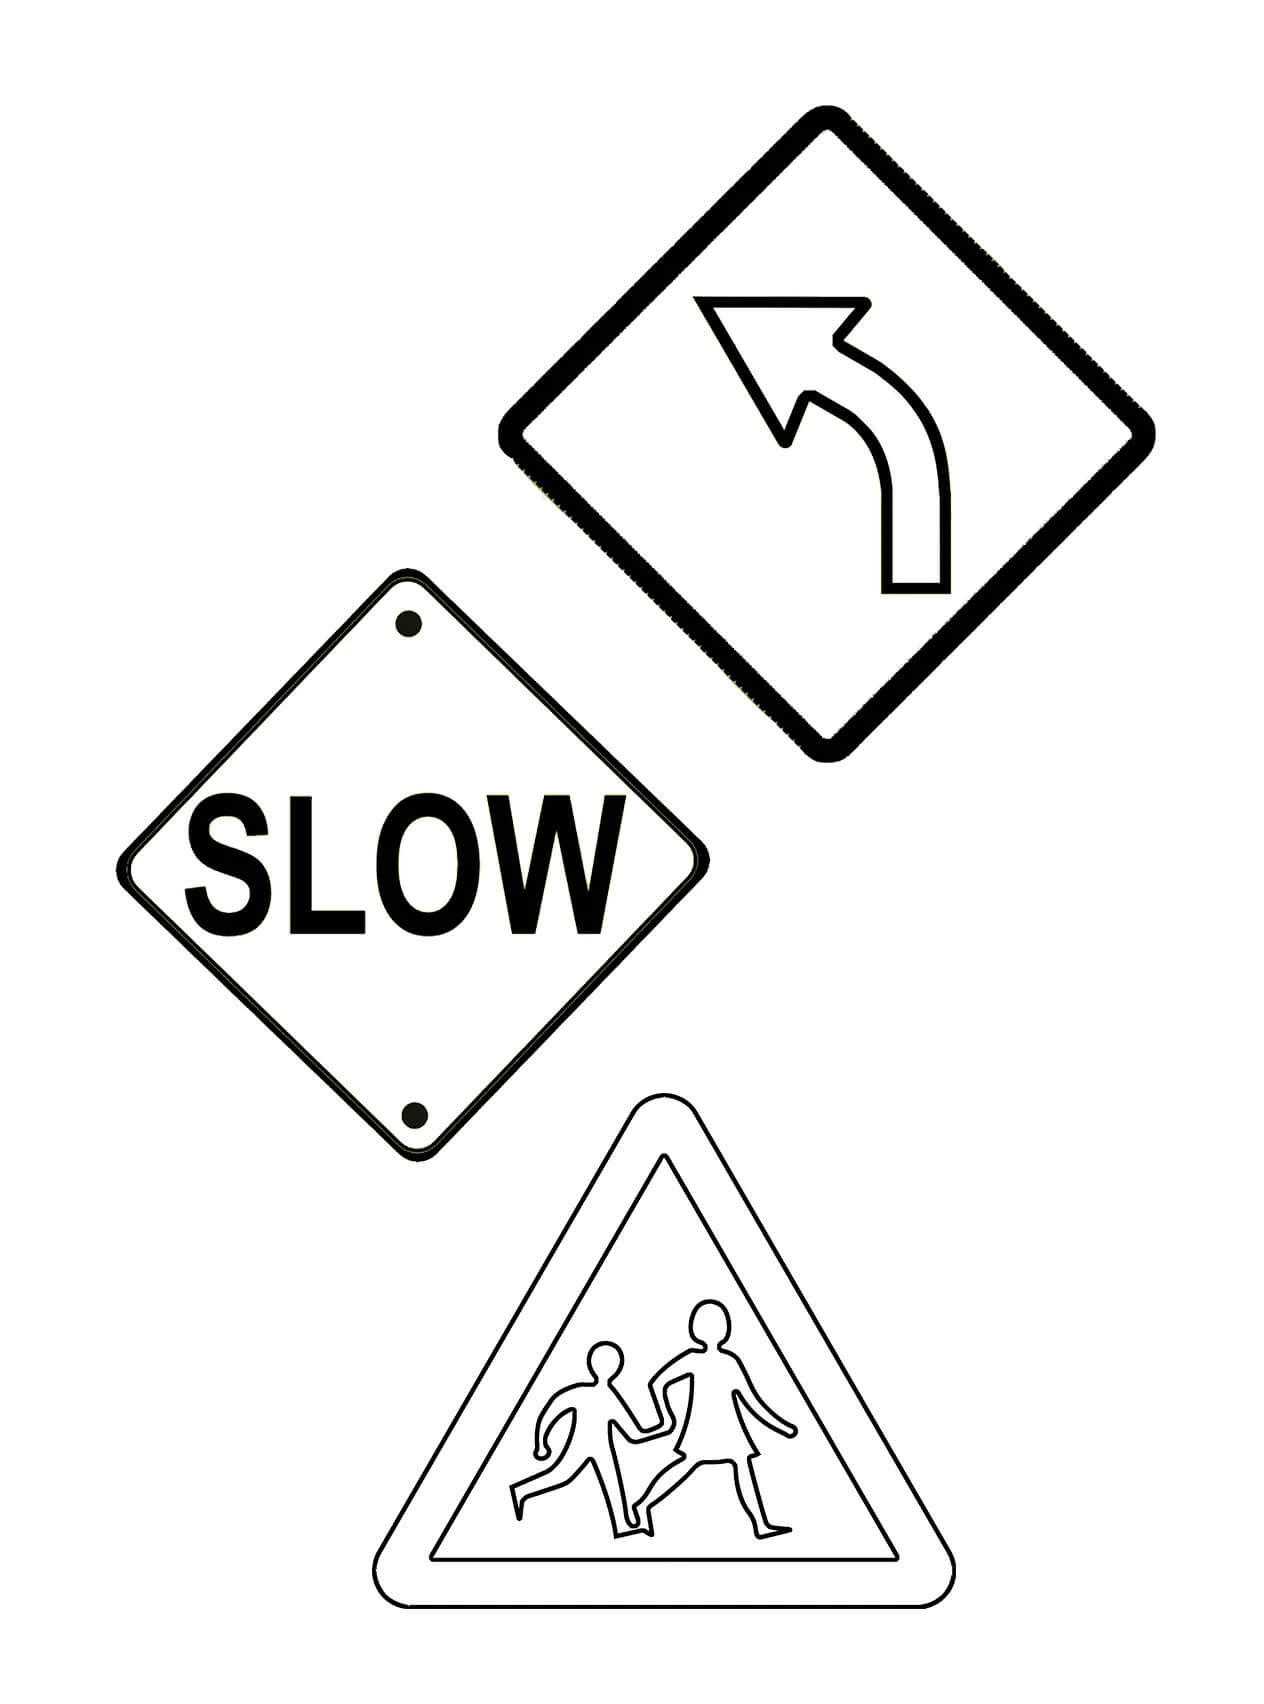 Three Street Signs in Road and Street Safety